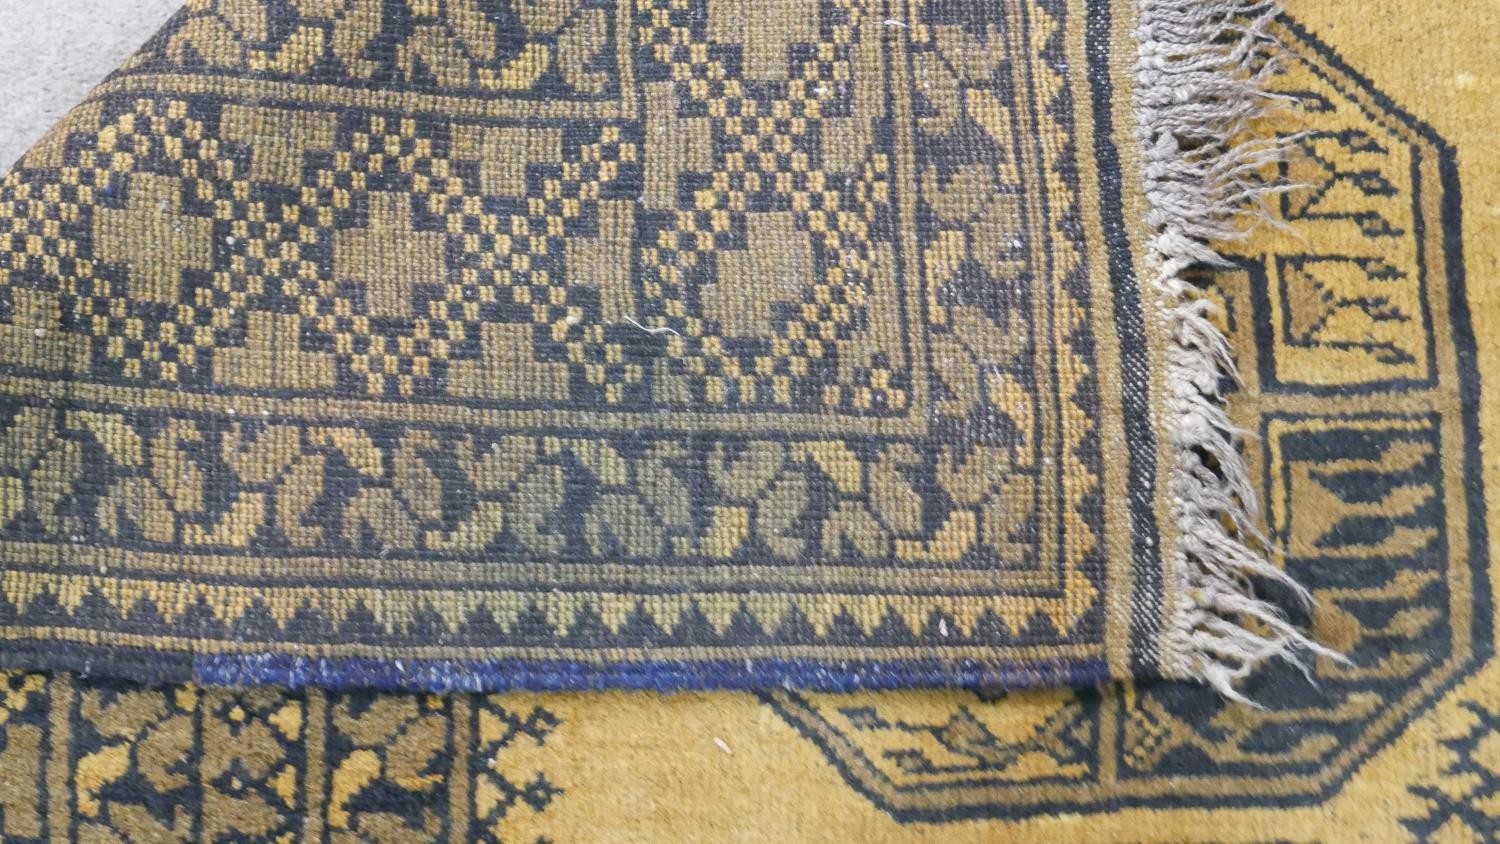 A hand made Afghan carpet with repeating gul medallions on a gold ground contained within multiple - Image 7 of 7